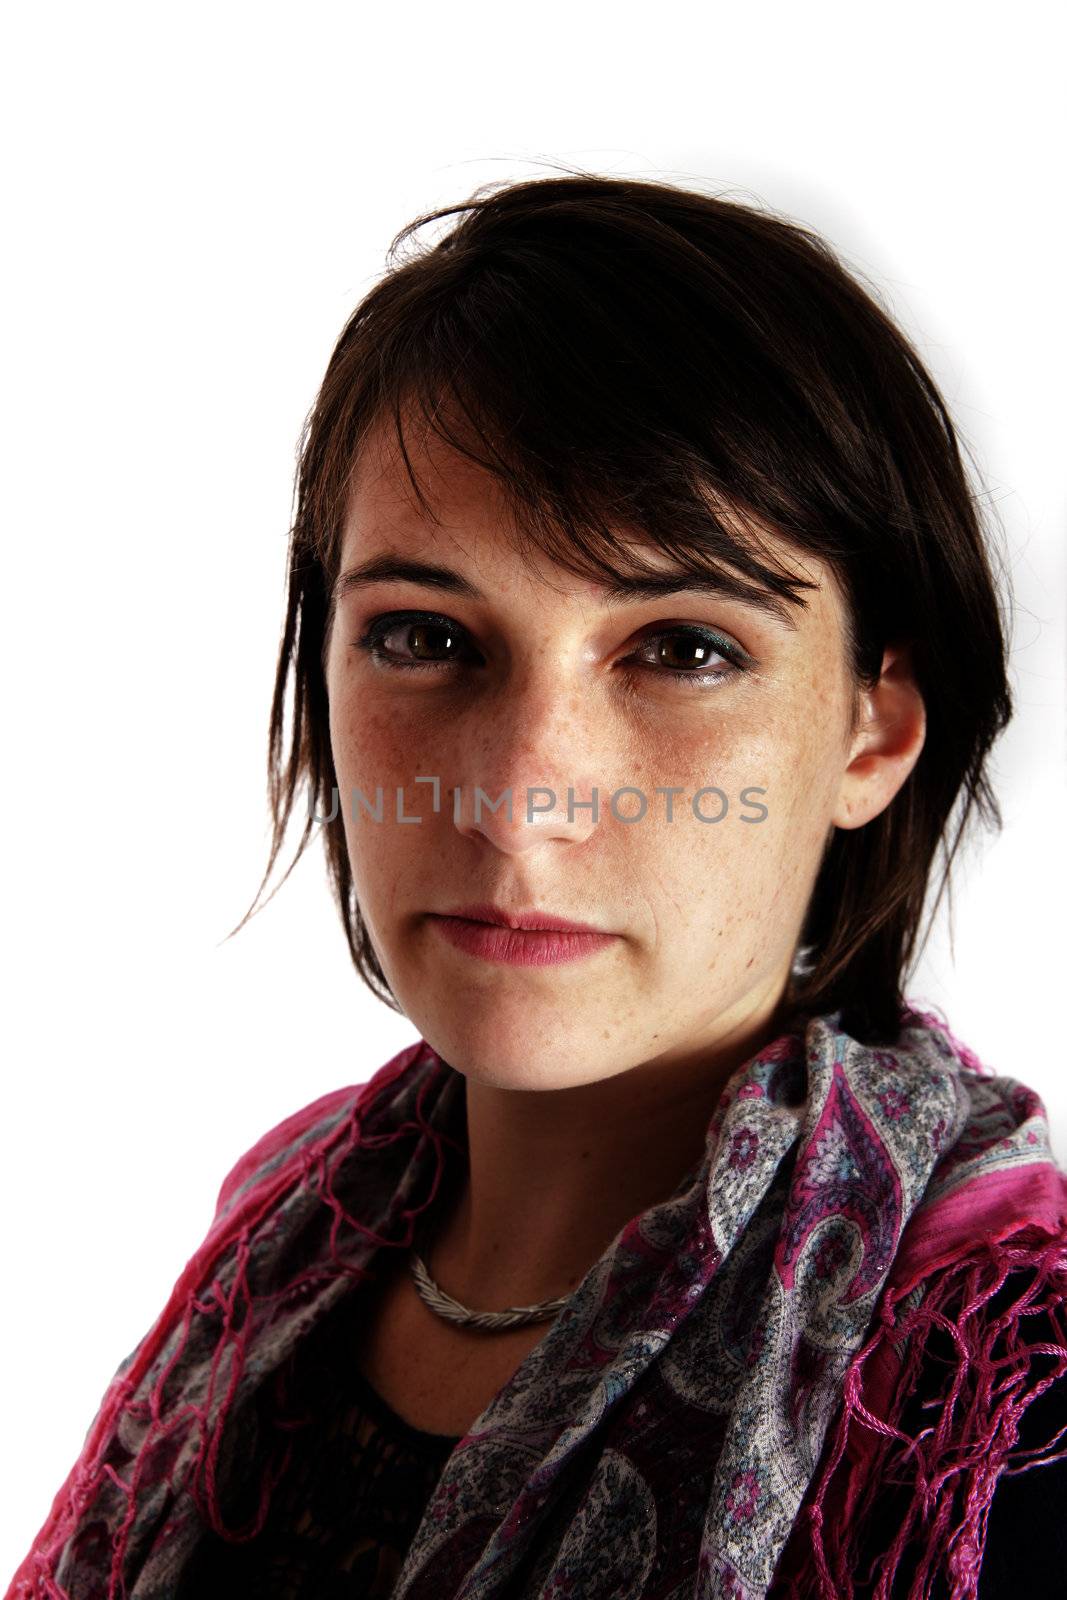 portrait of a young brunette woman with colored scarf looking ahead